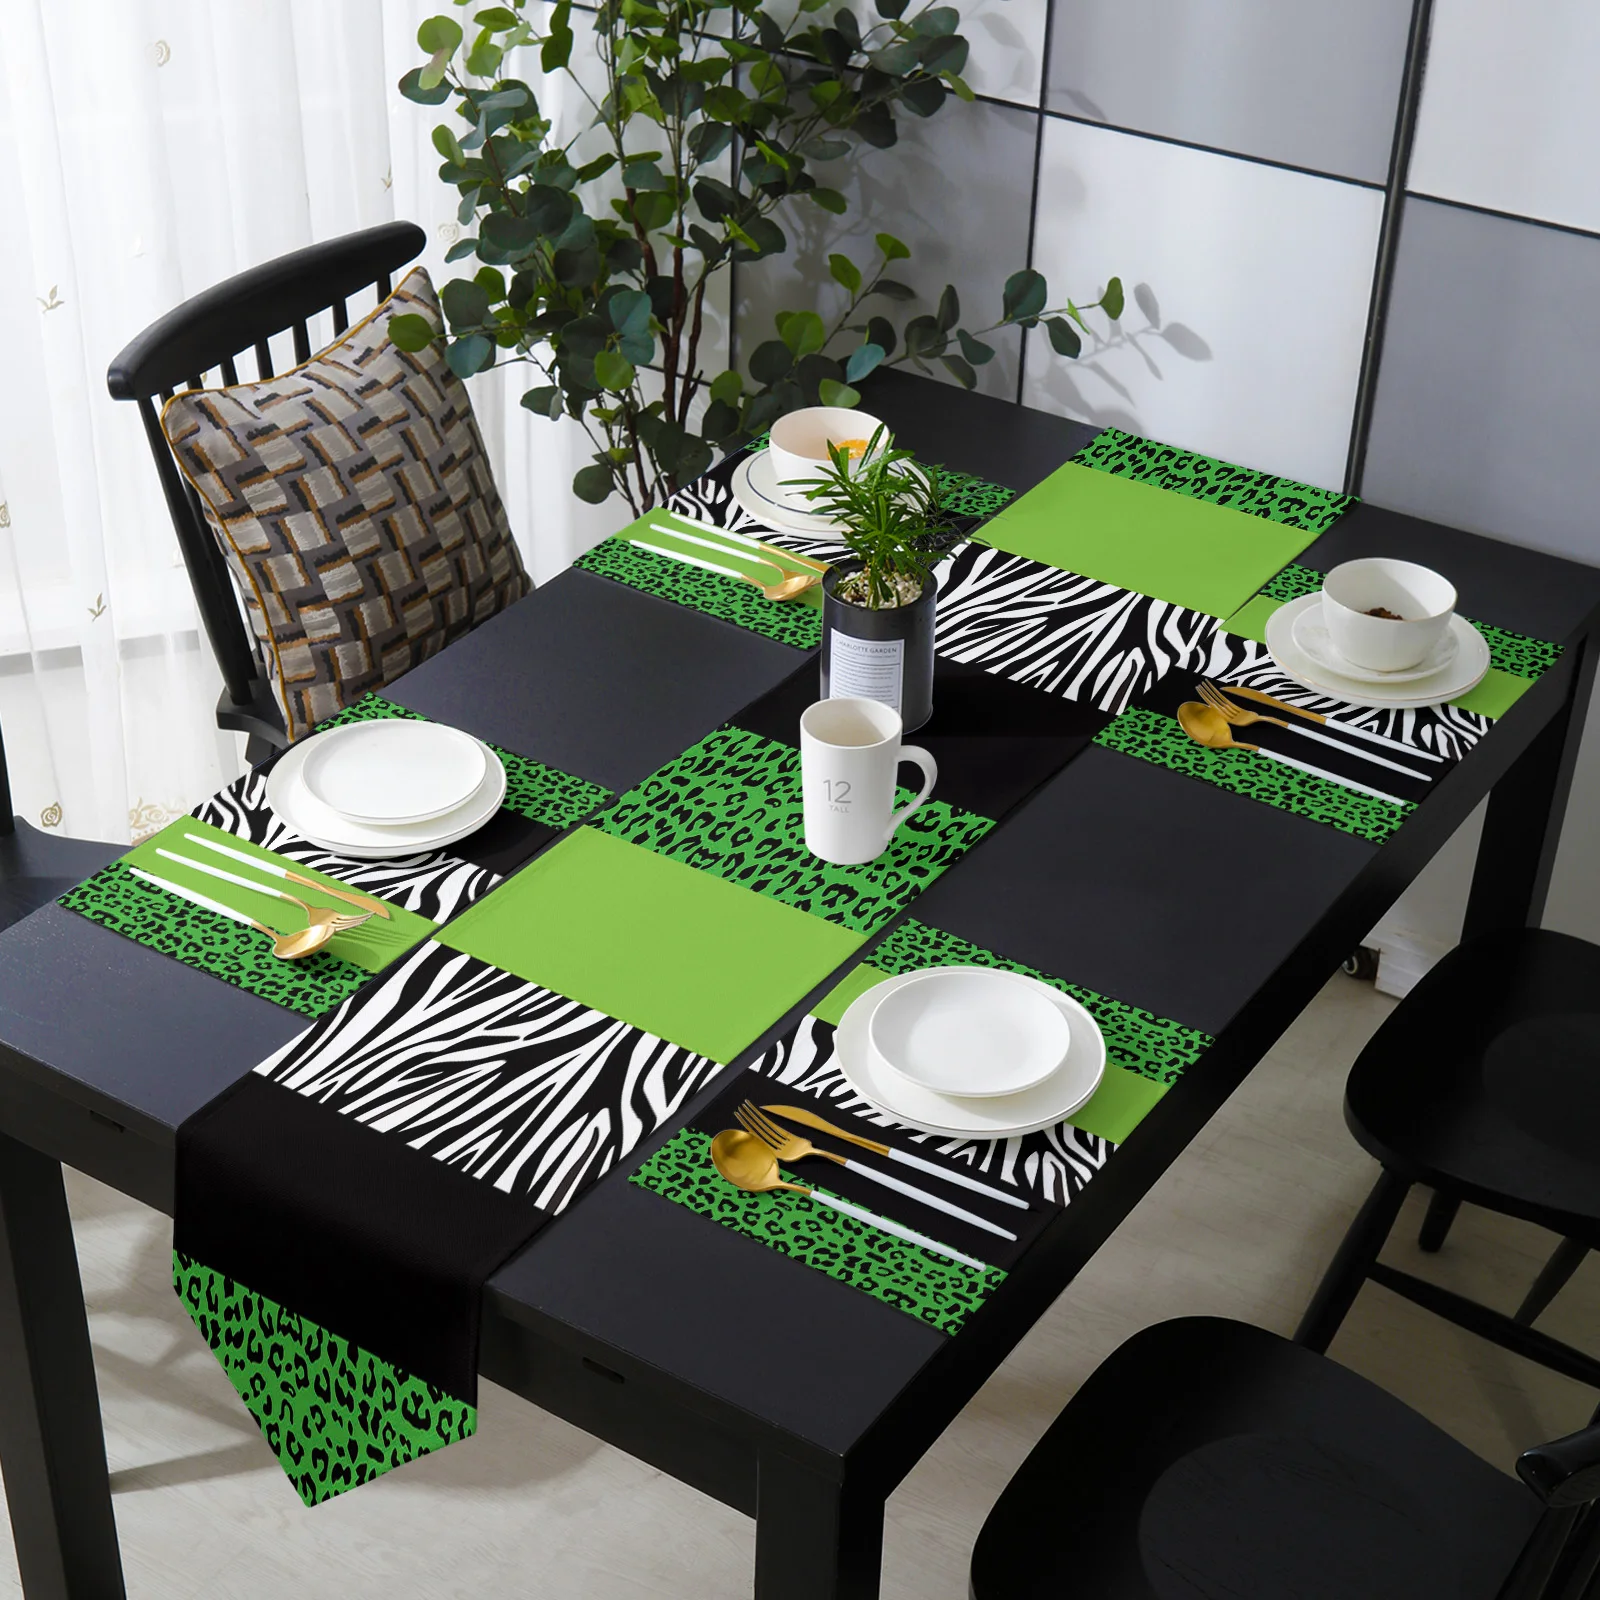 

Stripes Green Black Leopard Zebra Print Table Runner Table Mats Cover For Home Wedding Banquet Festival Party Hotel Decoration